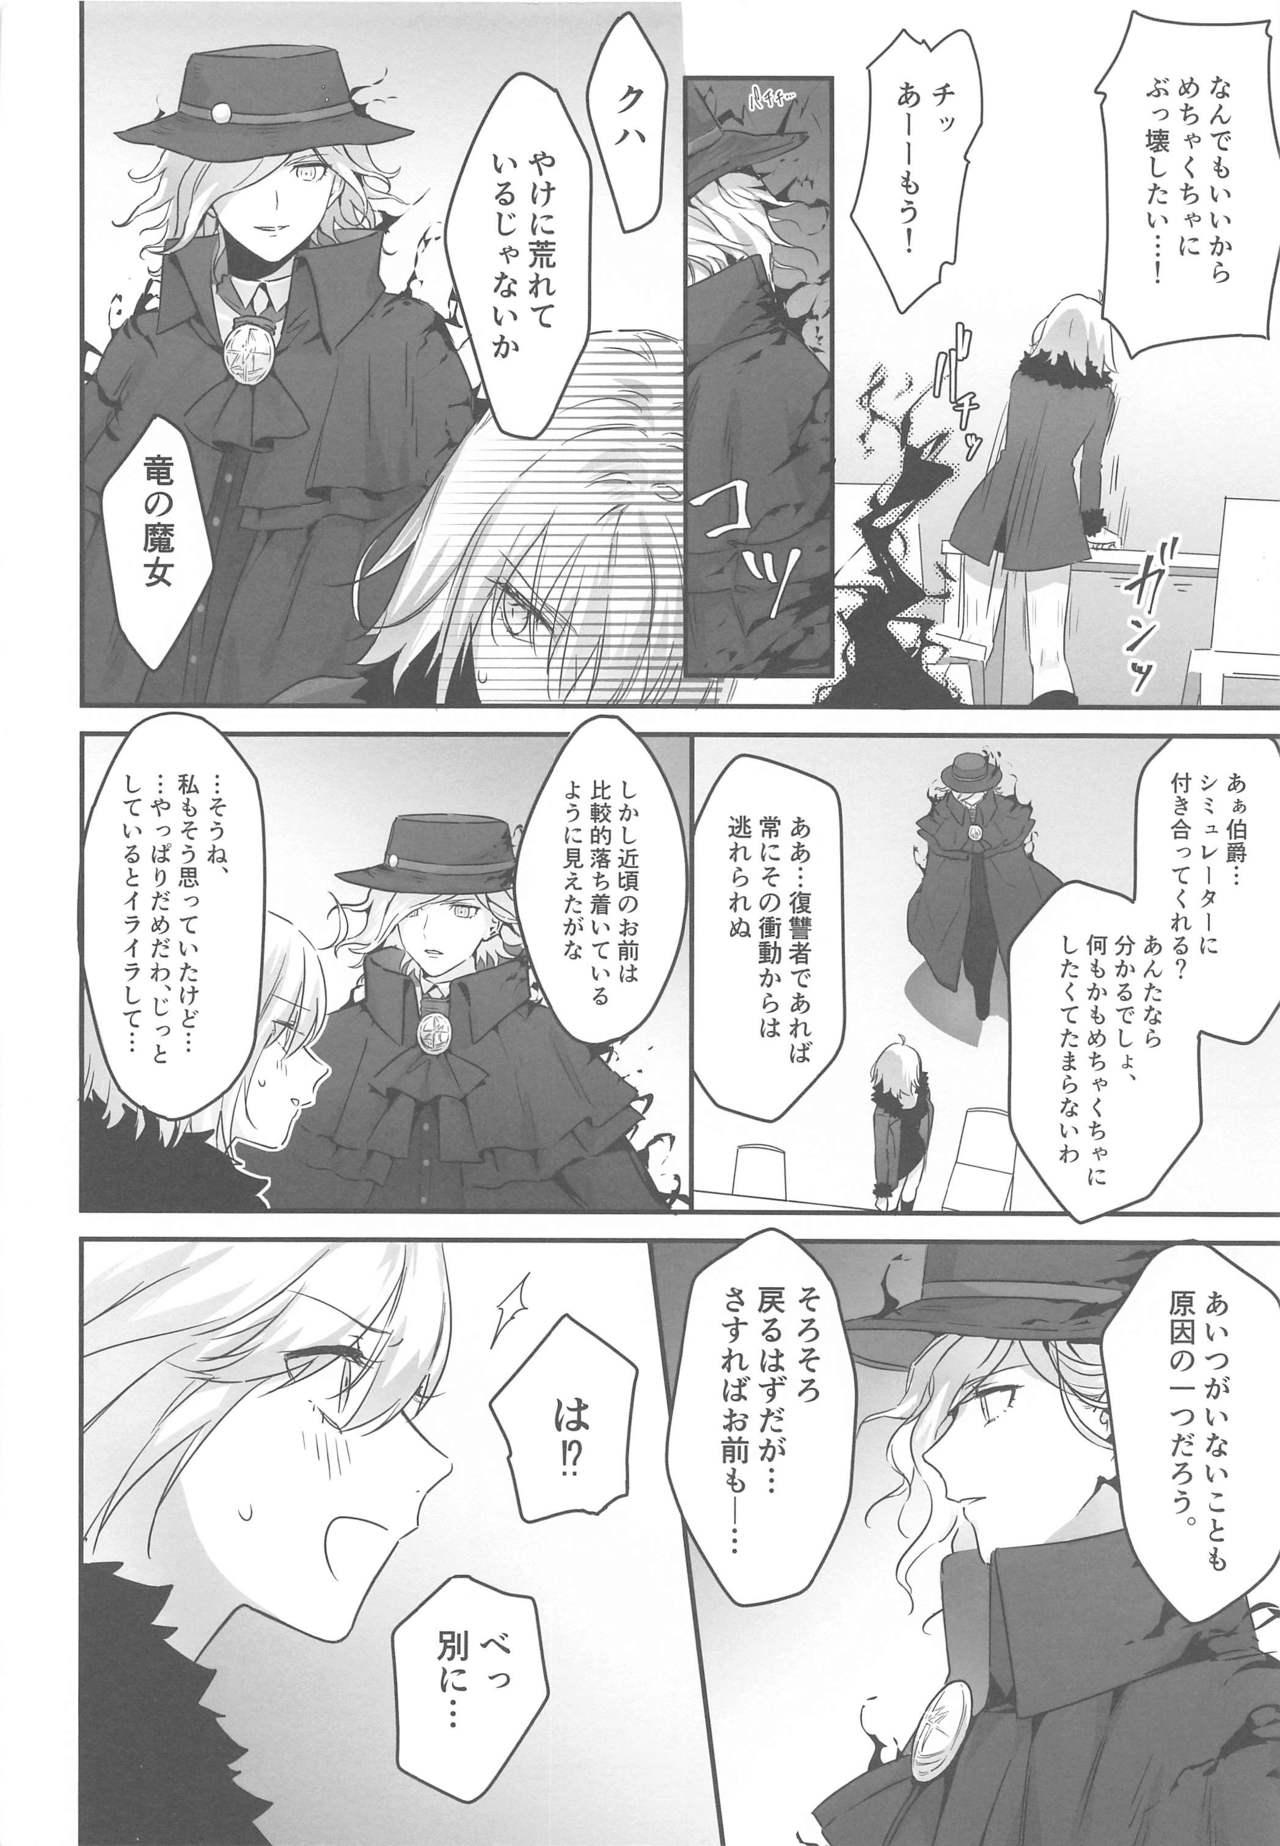 Euro Porn alter's secret. - Fate grand order Chacal - Page 7